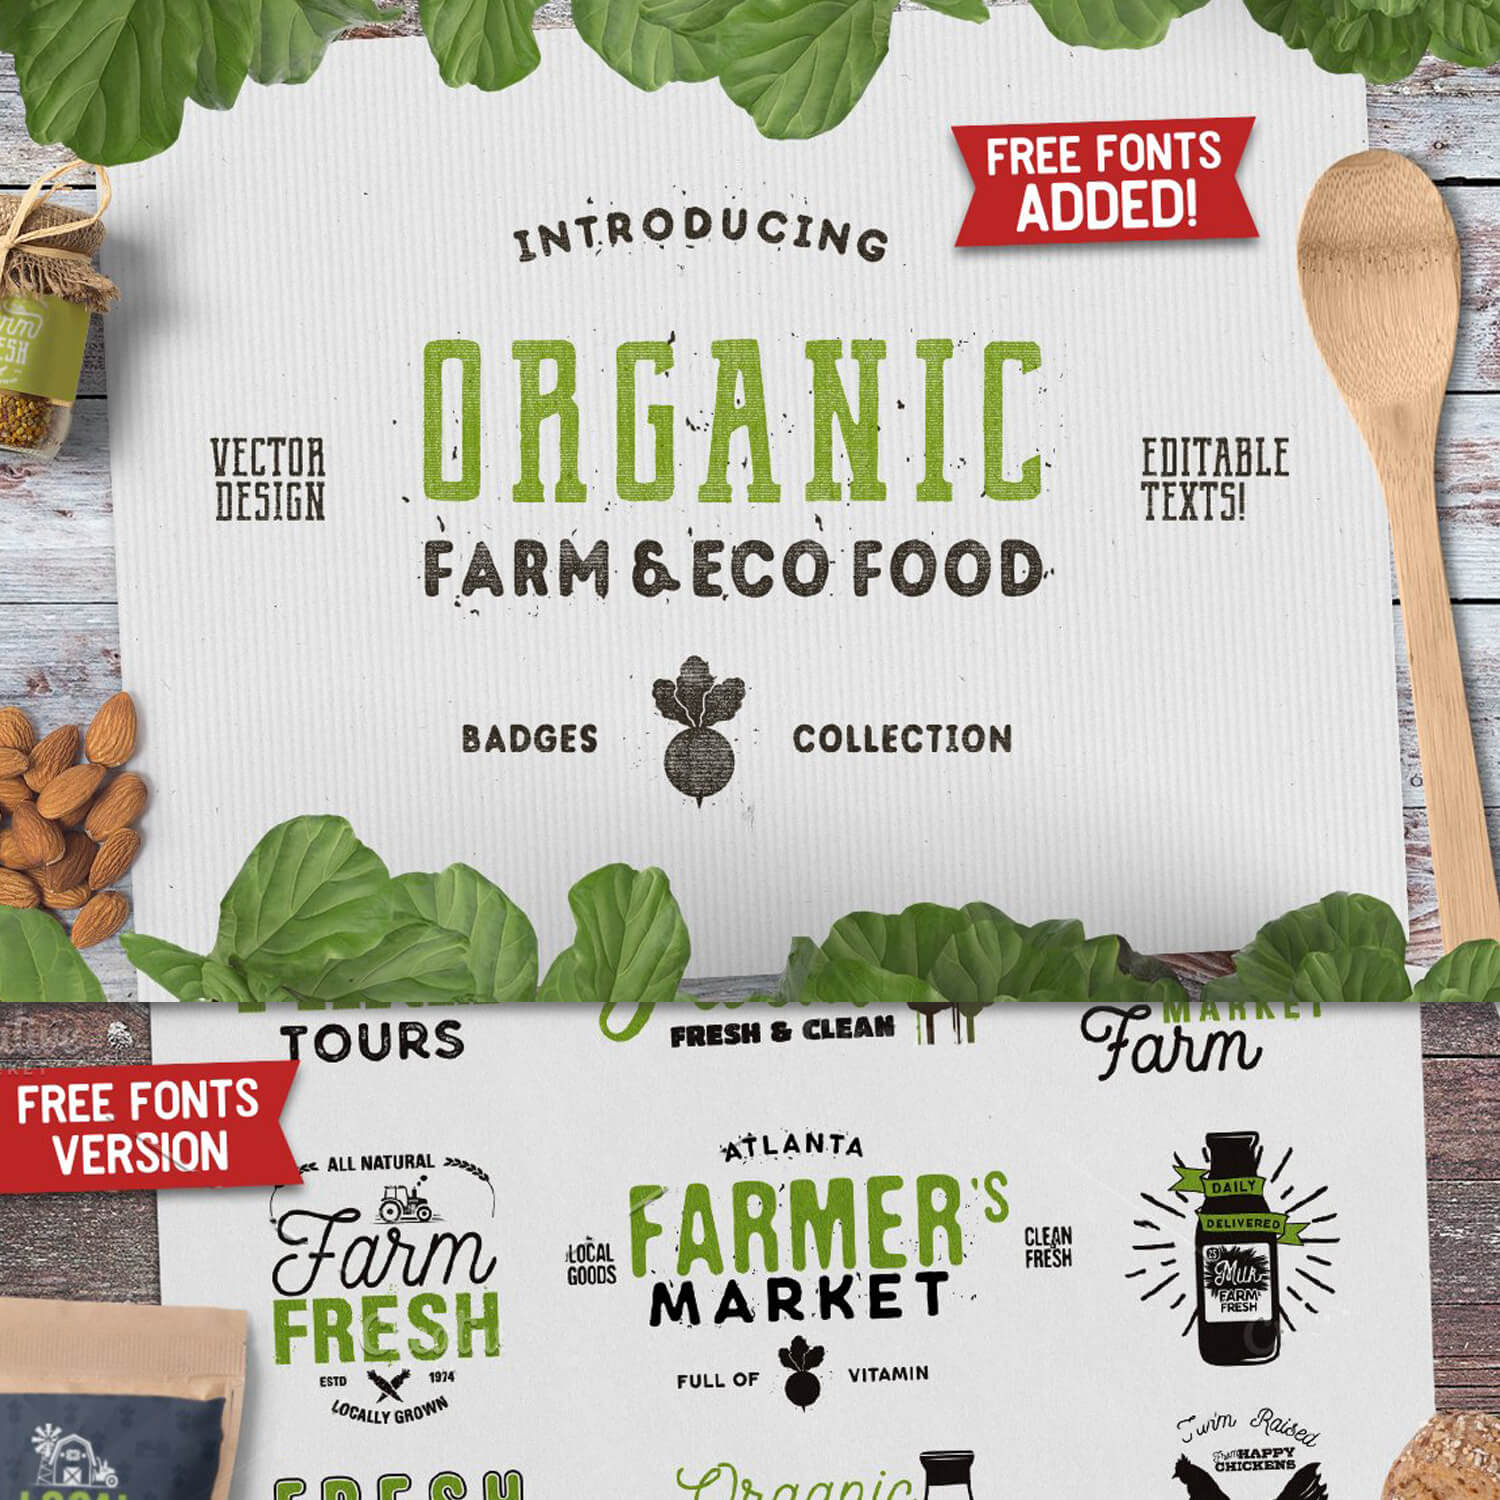 Free fonts version, farm and eco food and badges collection.